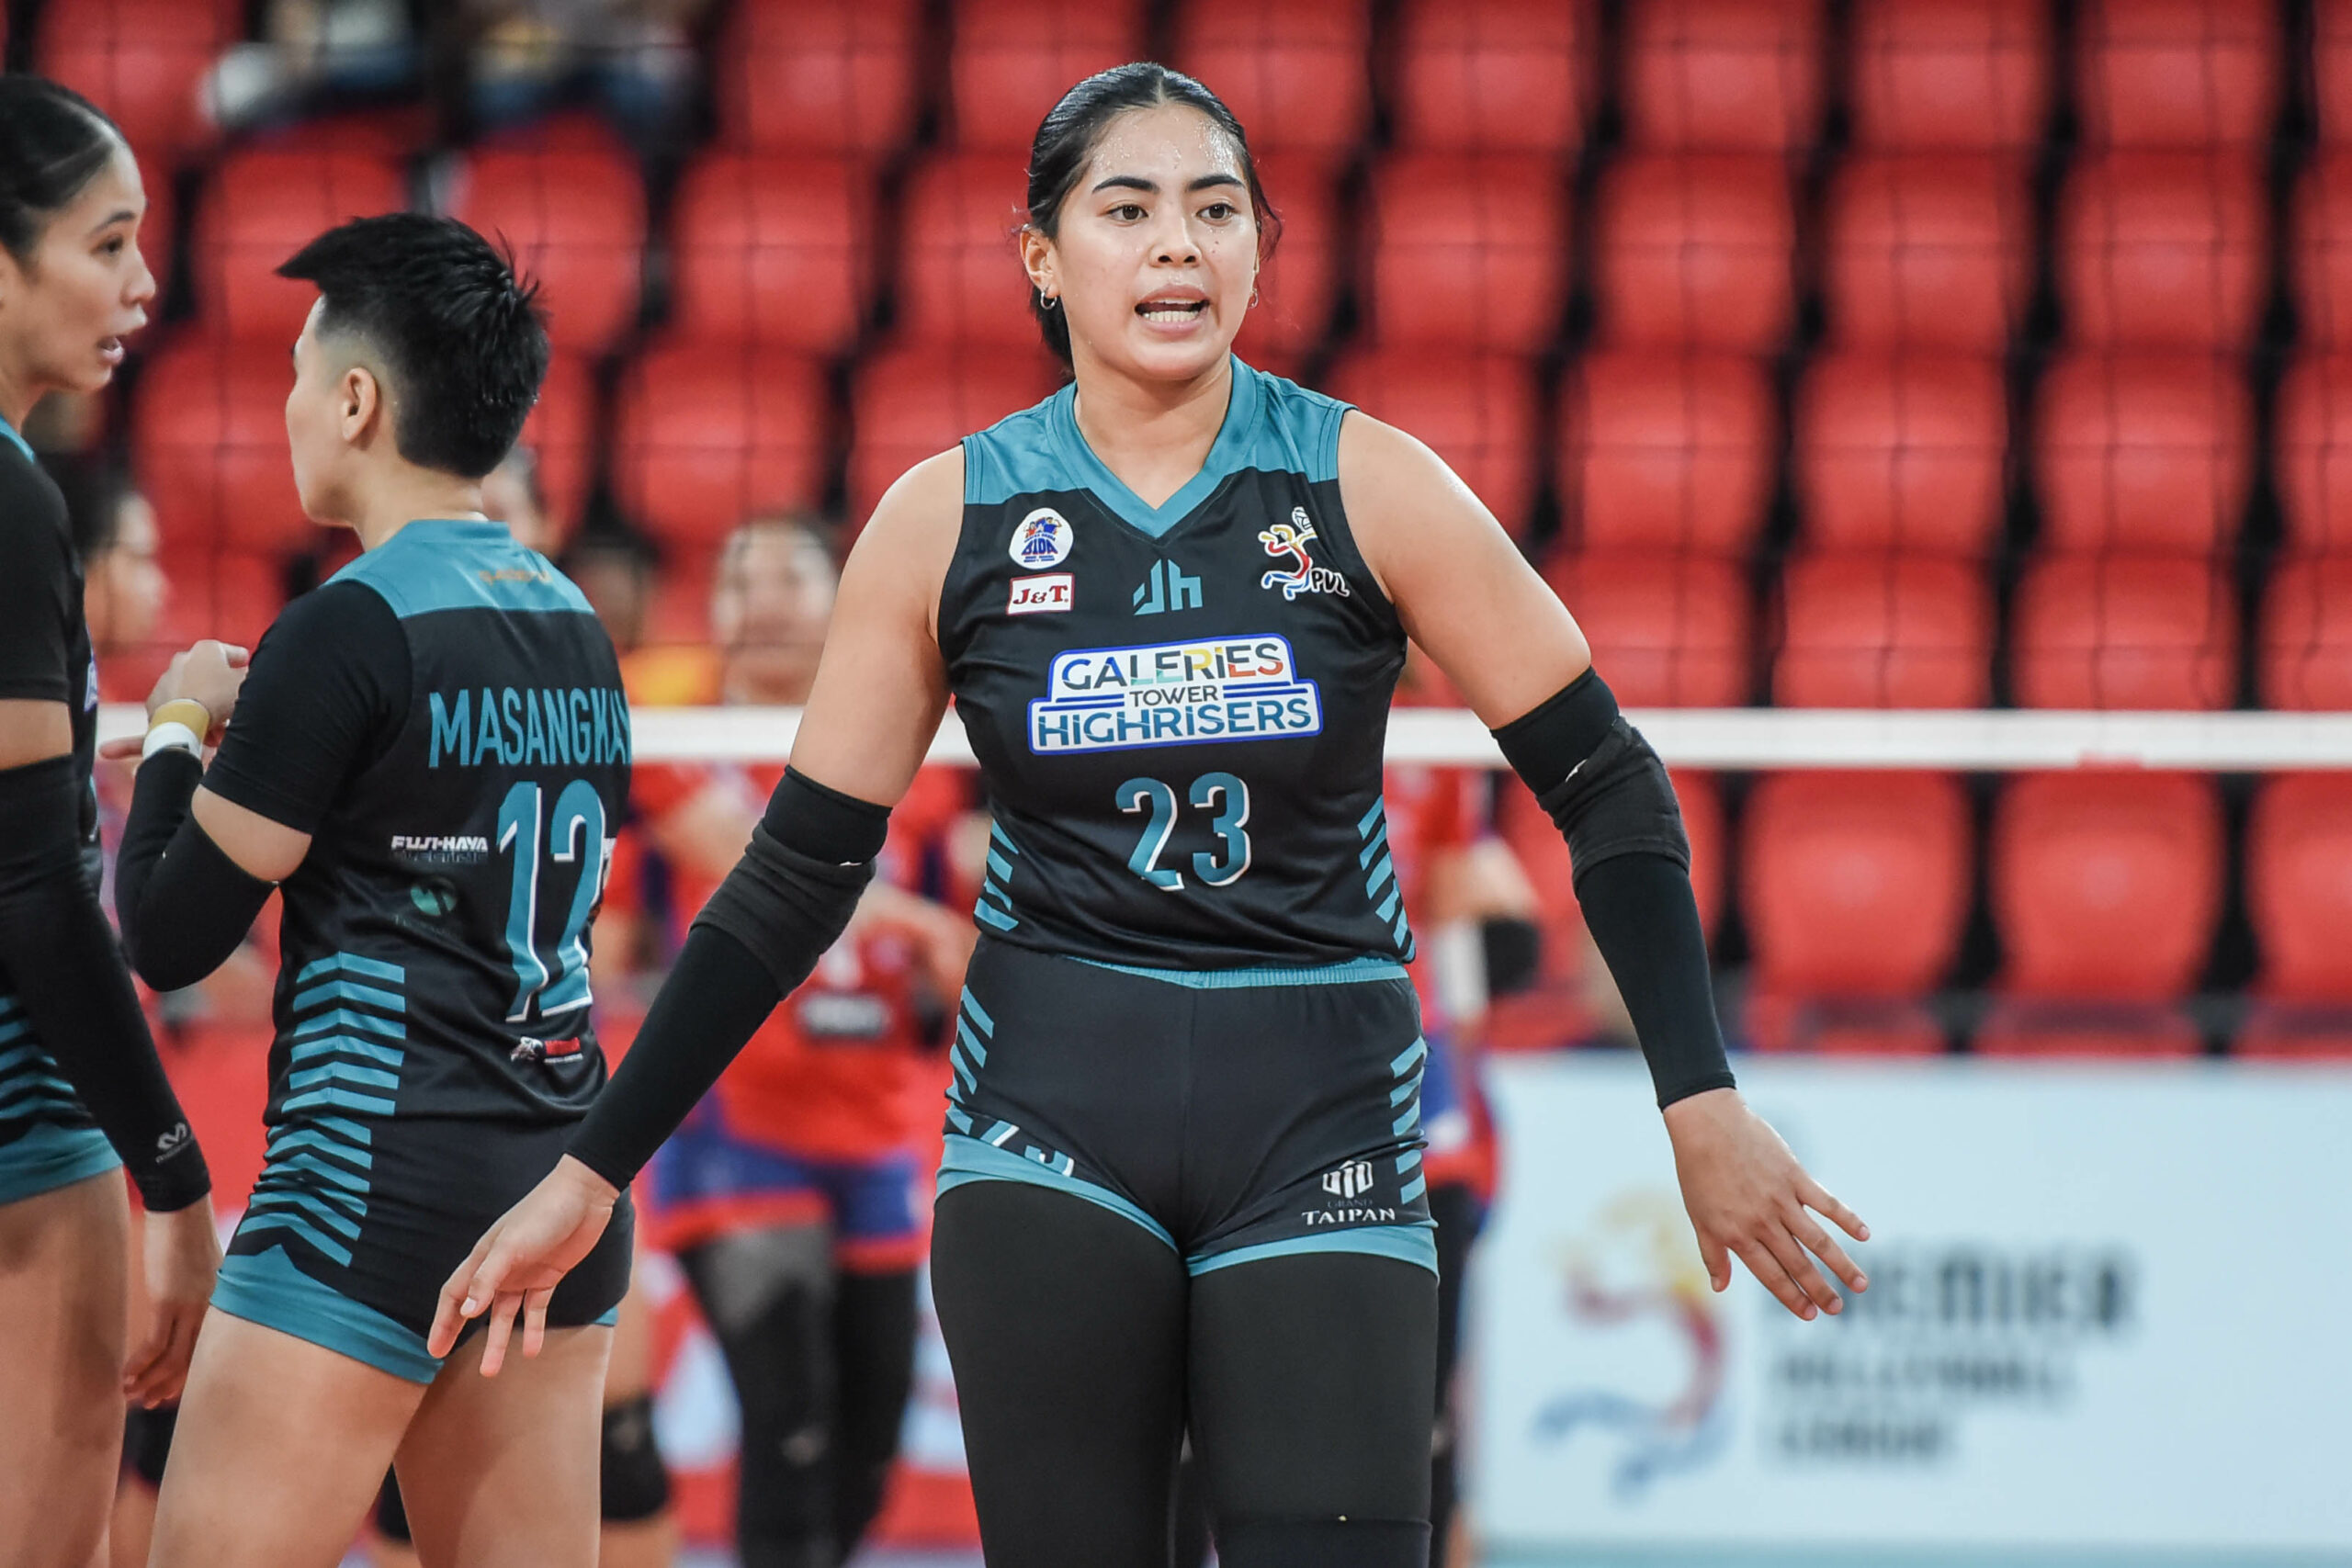 PVL-AFC-Gerflor-vs.-Galeries-Roma-Doromal-5419-scaled PVL: Galeries Towers denies Gerflor with reverse sweep, notches franchise breakthrough News PVL Volleyball  - philippine sports news